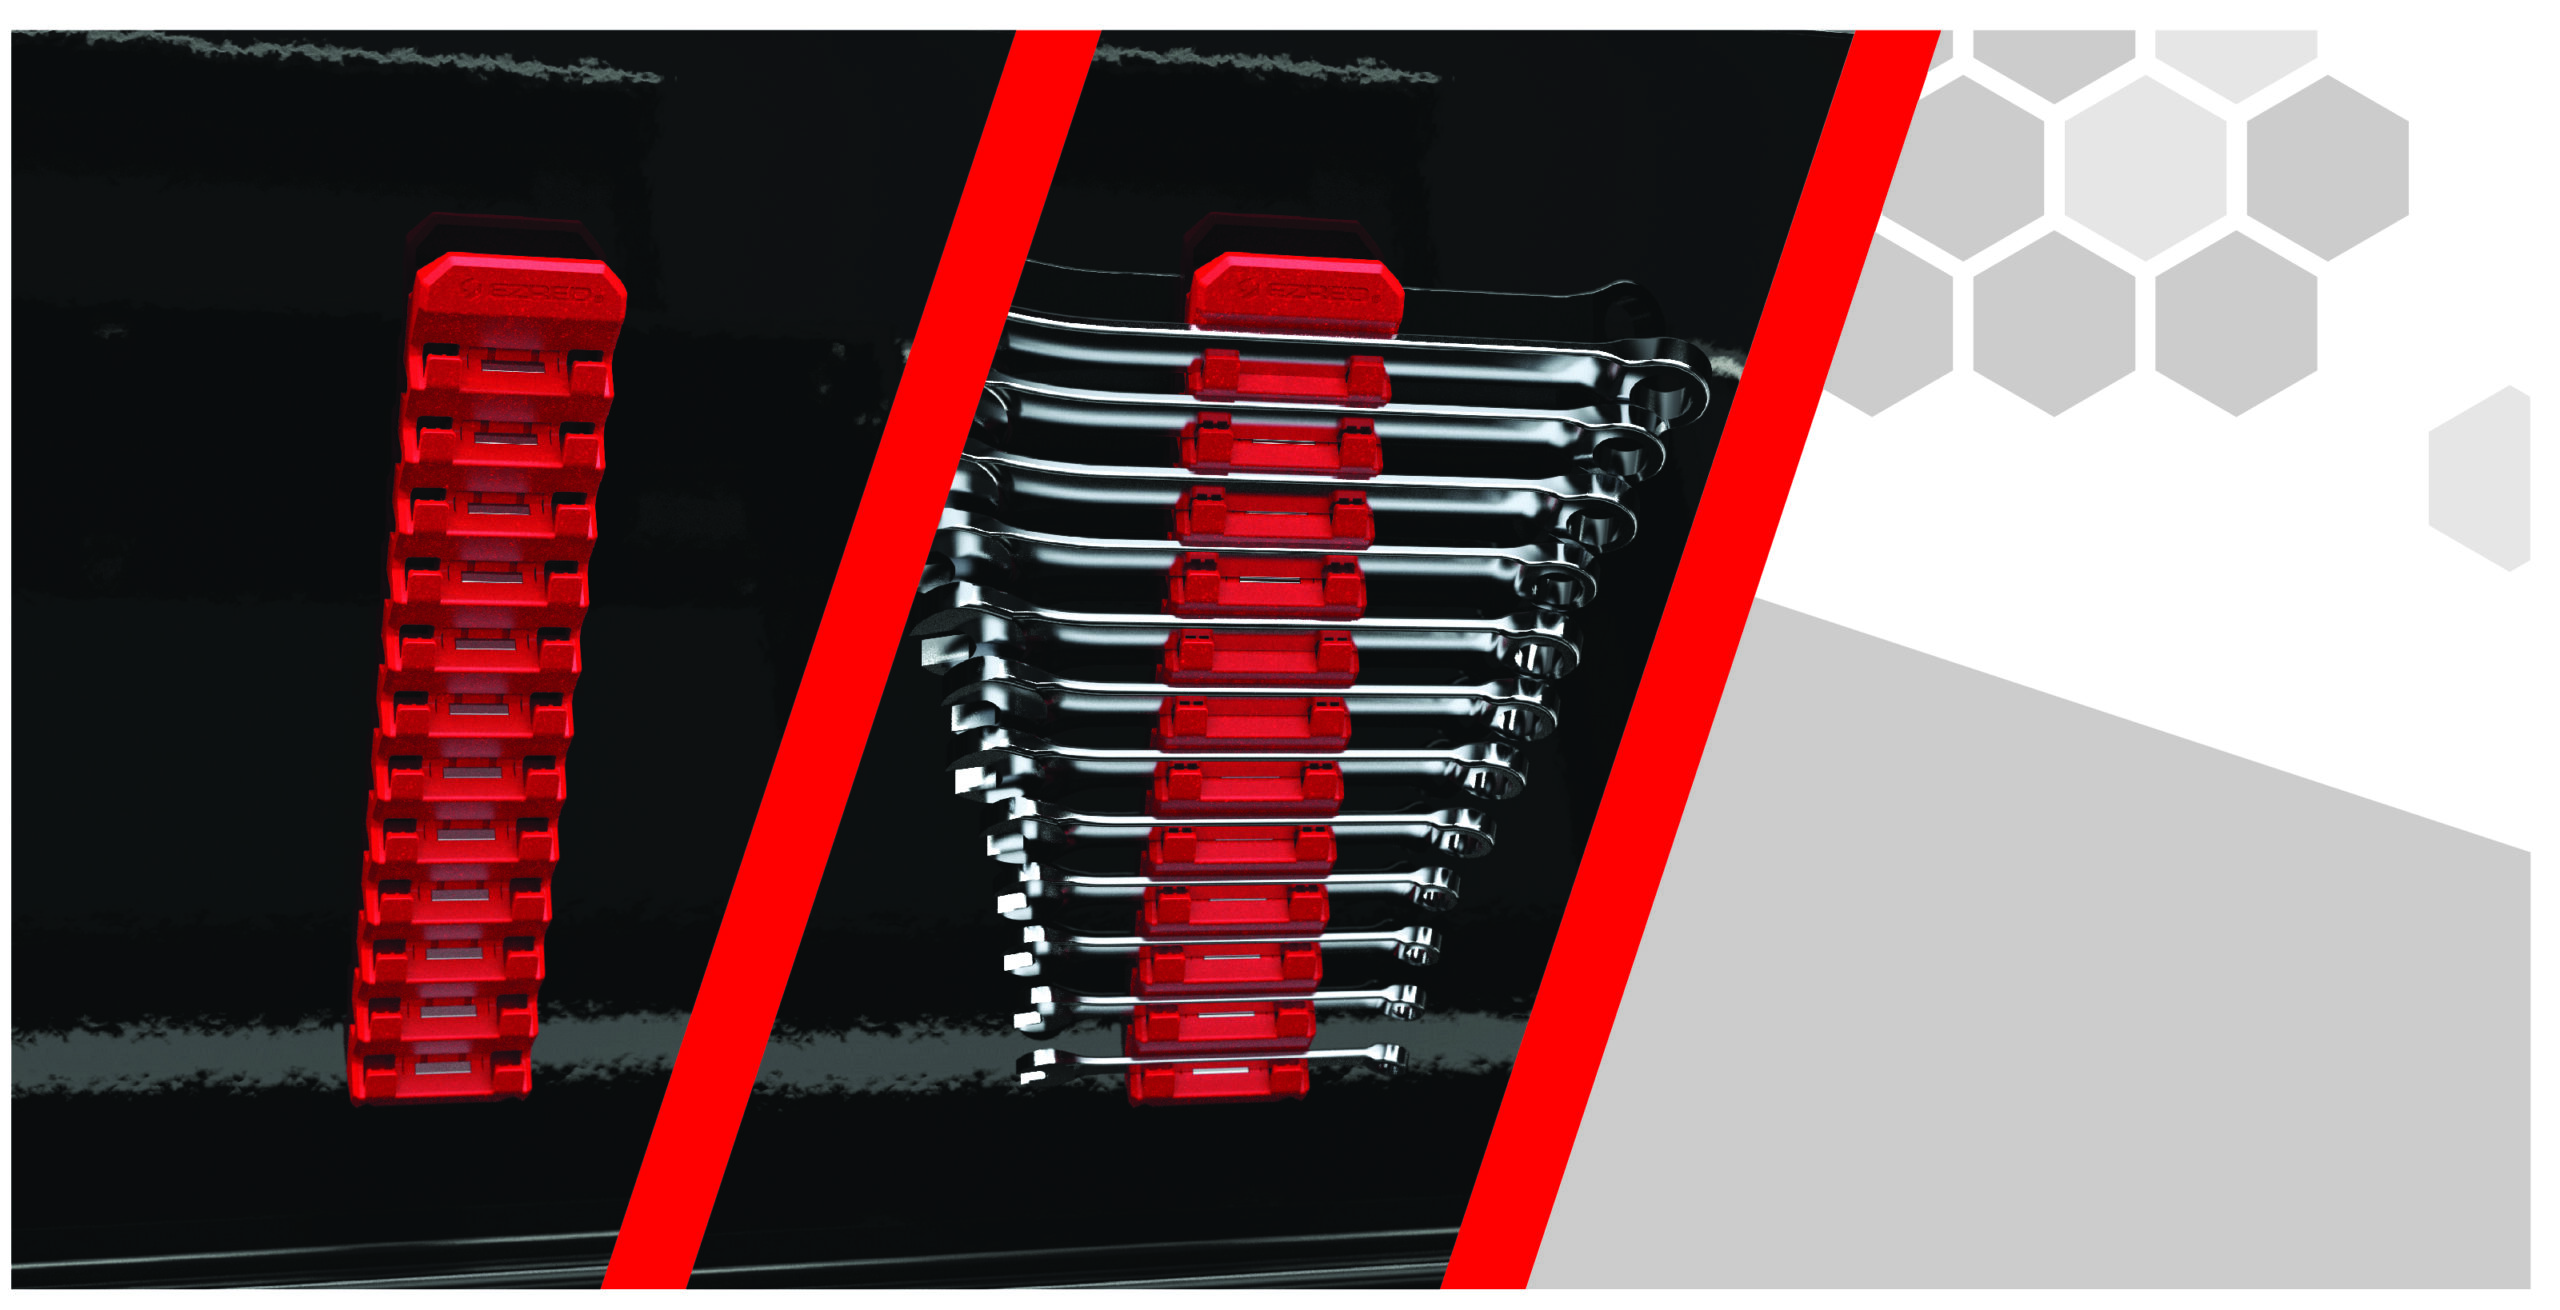 EZRED - WR10-RD Ezred WR10RD Magnetic Wrench Organizer Holdup To 10  Wrenches with Individual Magnetic Wrench Holders & Magnetic Bottom